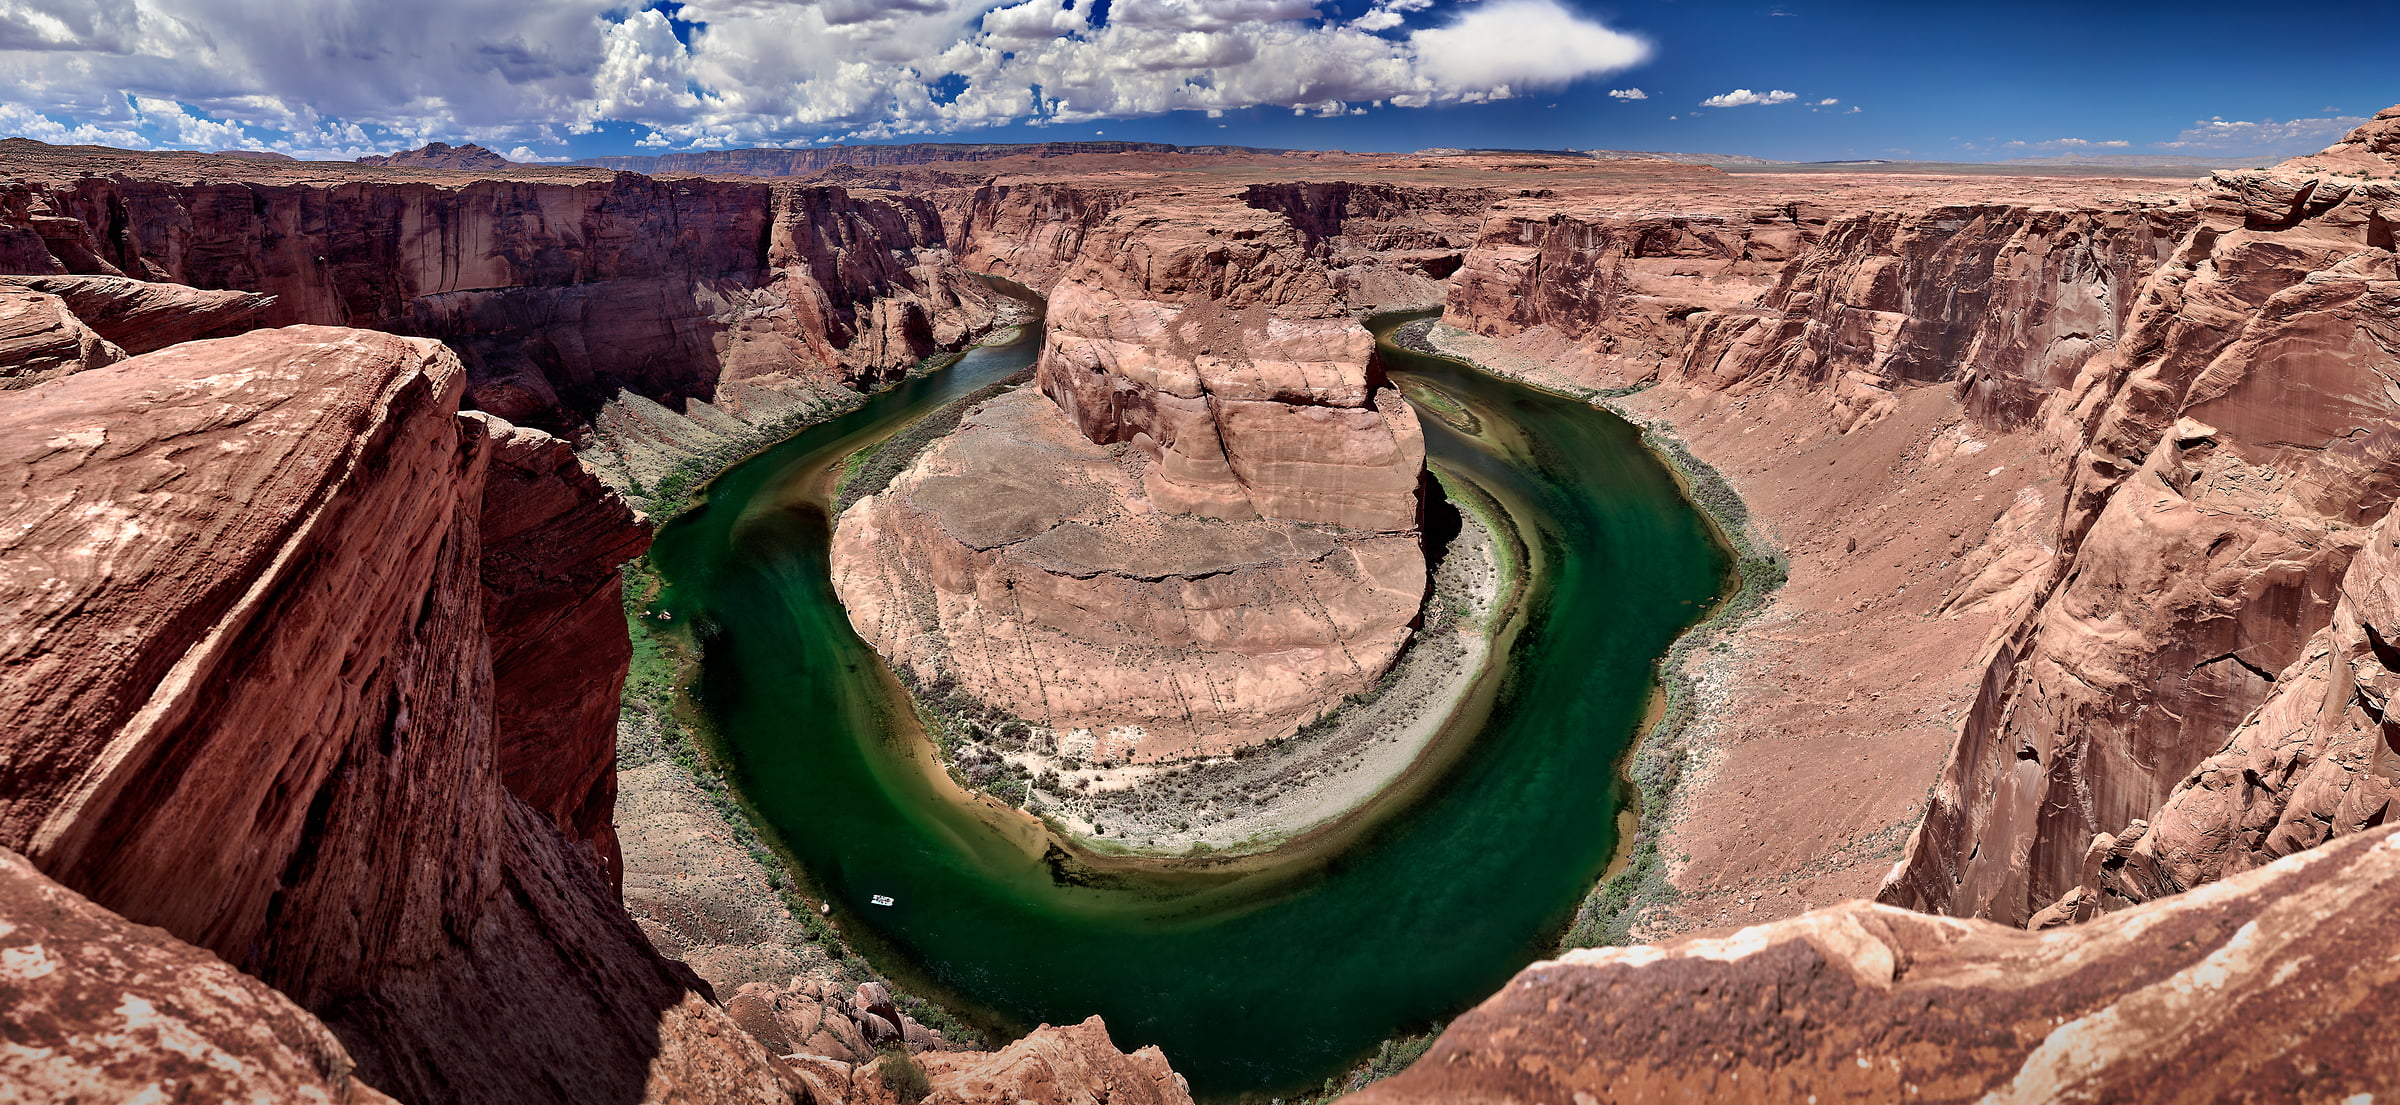 514 megapixels! A very high resolution landscape photo of Horseshoe Bend, a canyon in the American west; VAST photo created by Phil Crawshay in Horseshoe Bend, Page, Arizona, USA.